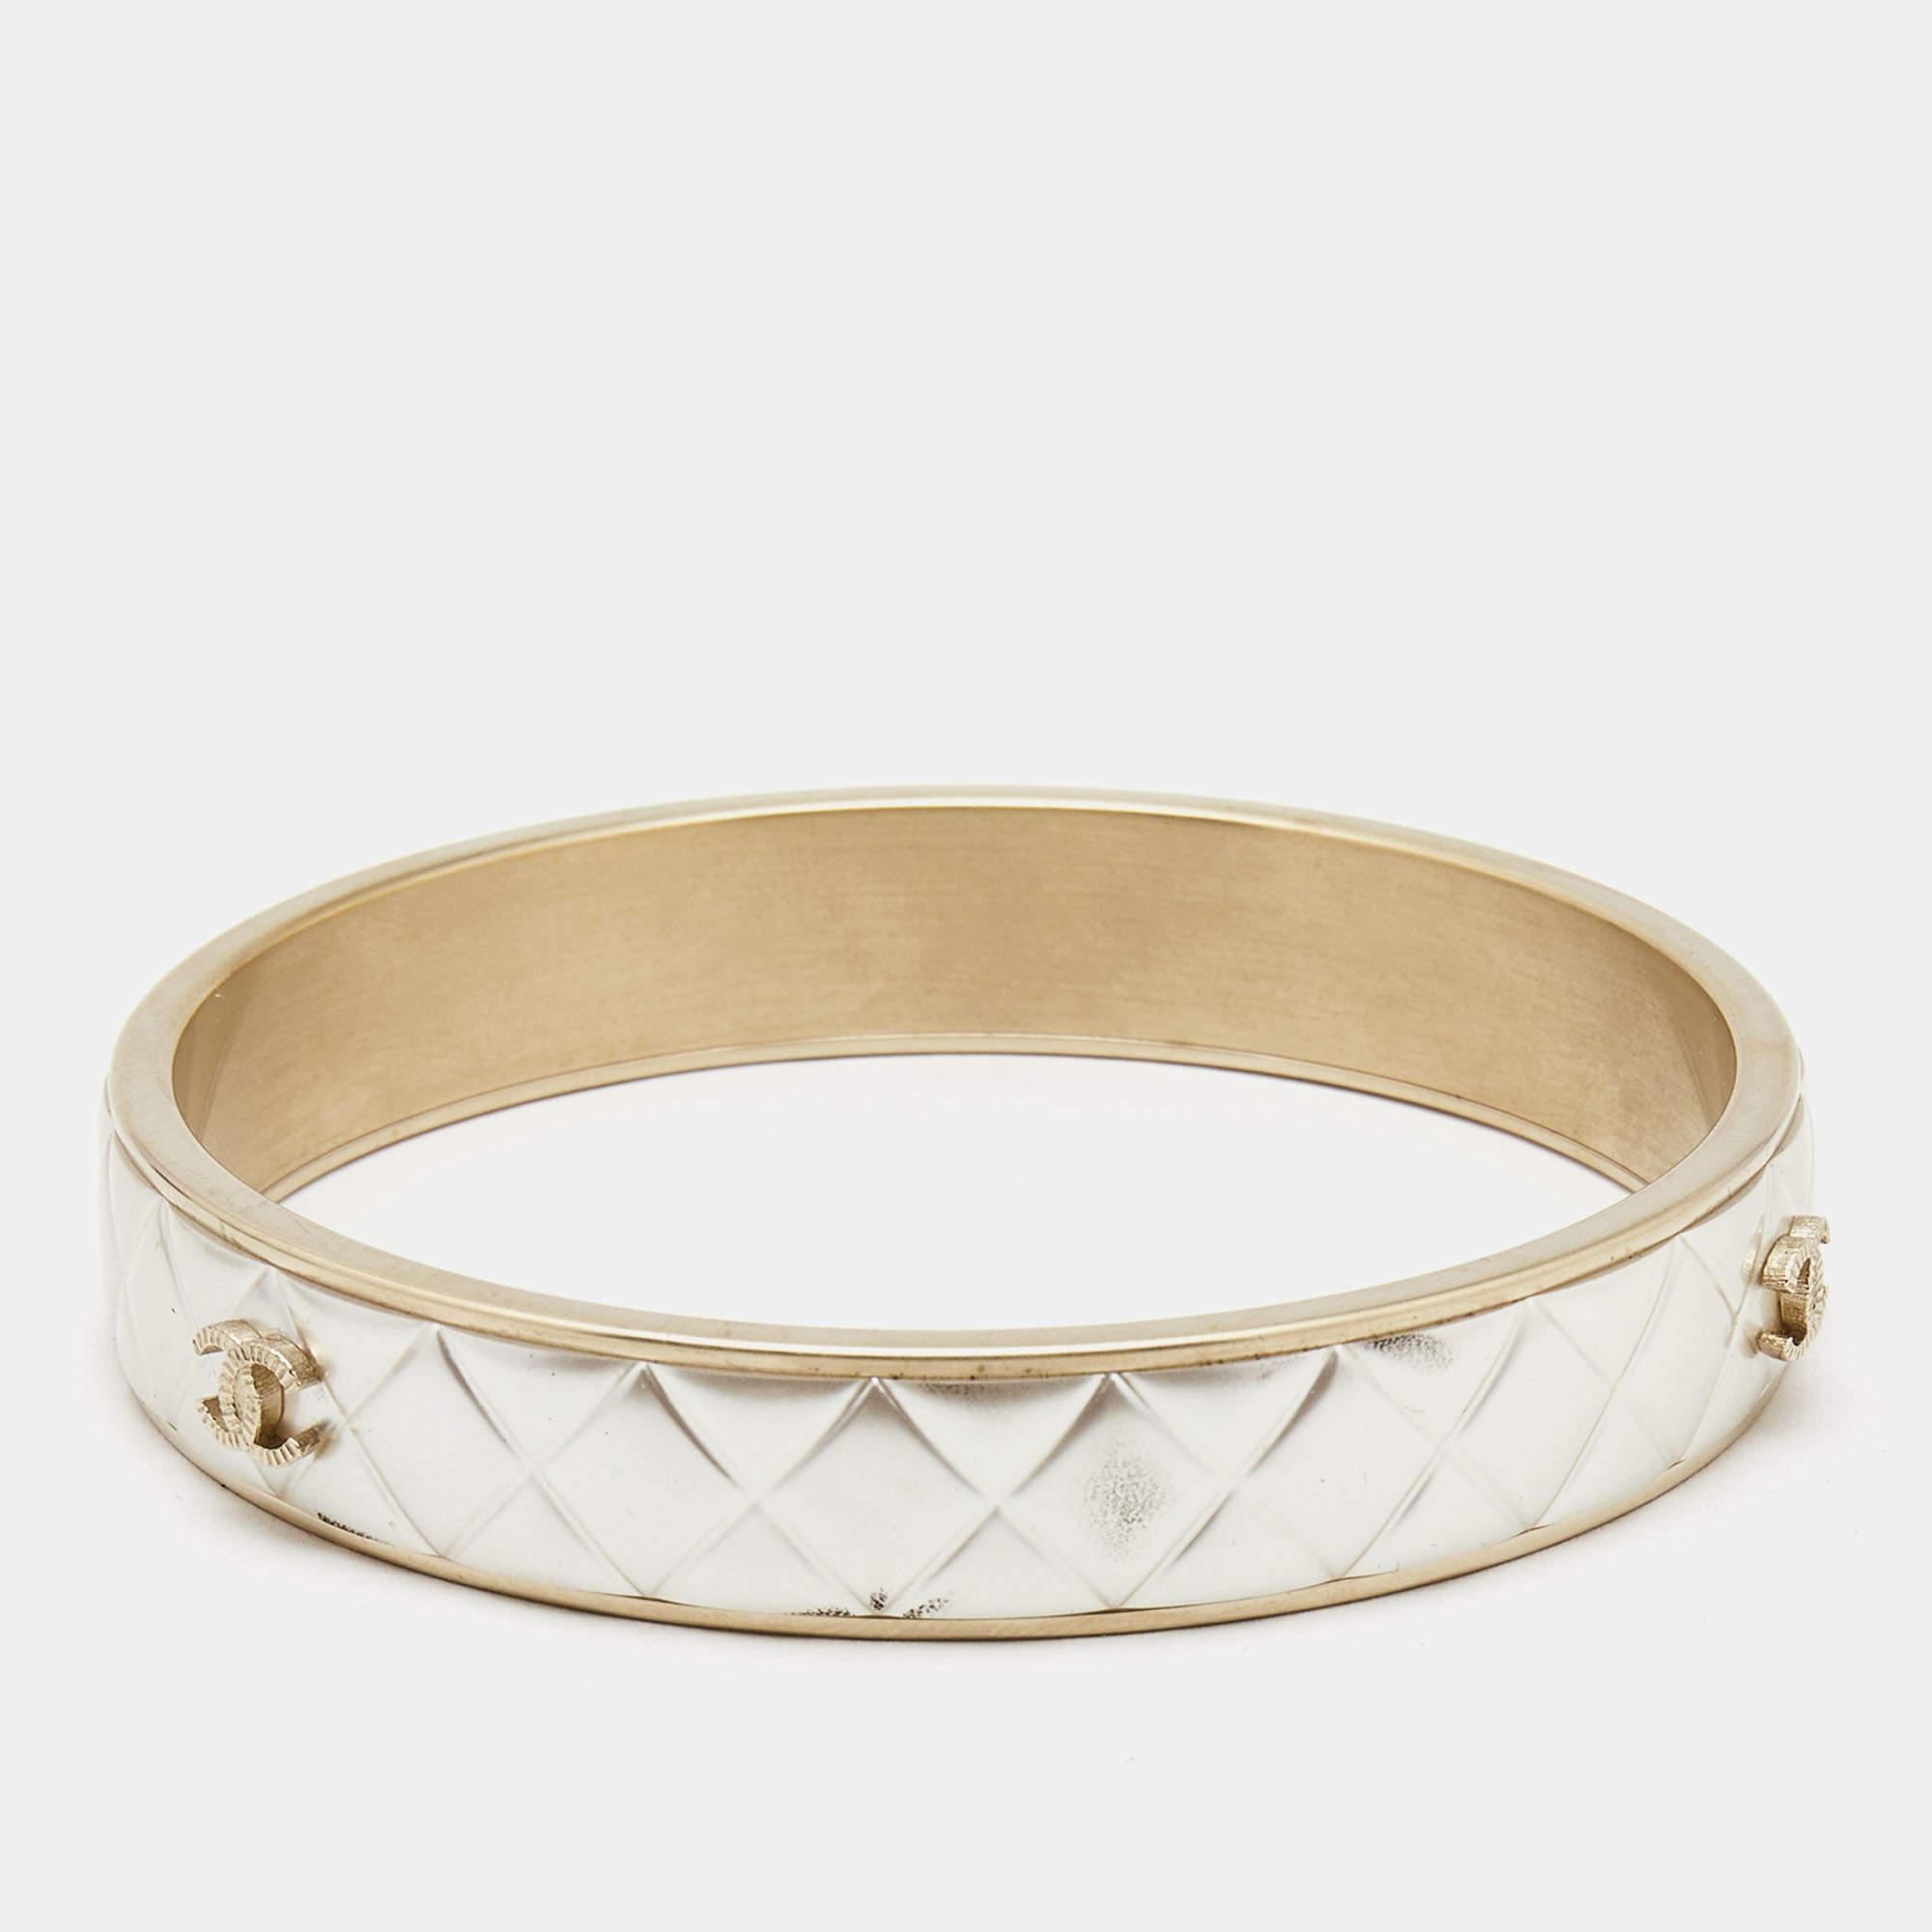 The Chanel CC bracelet is a stunning fashion accessory. Crafted with exquisite attention to detail, it features the iconic CC logo in a composite design, set against a quilted backdrop. This bracelet exudes luxury and sophistication, making it a